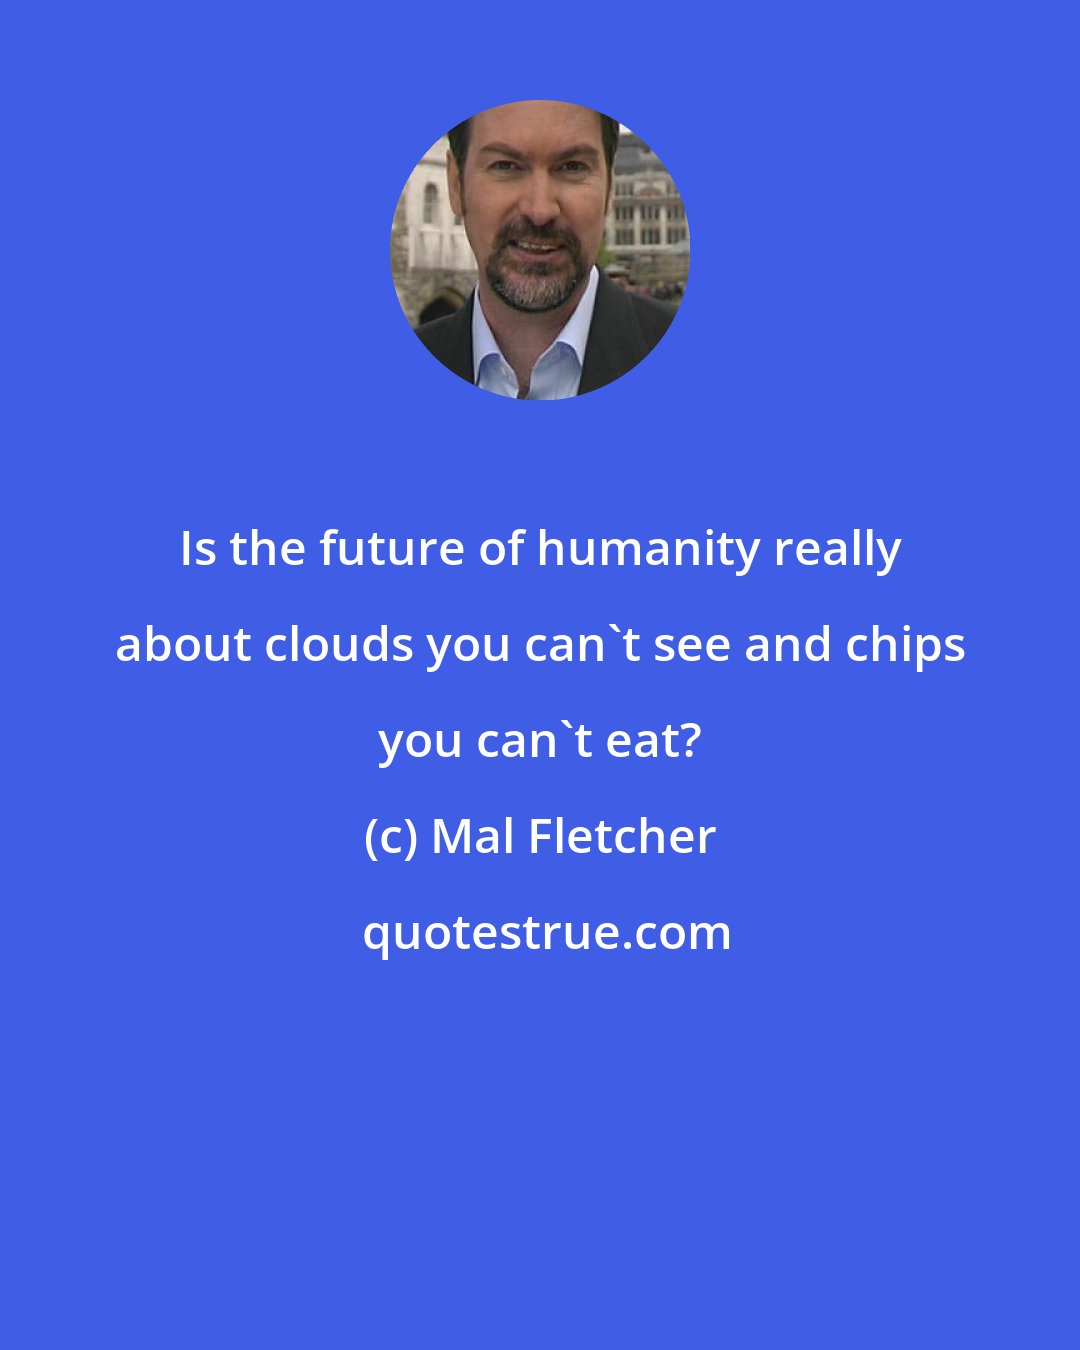 Mal Fletcher: Is the future of humanity really about clouds you can't see and chips you can't eat?